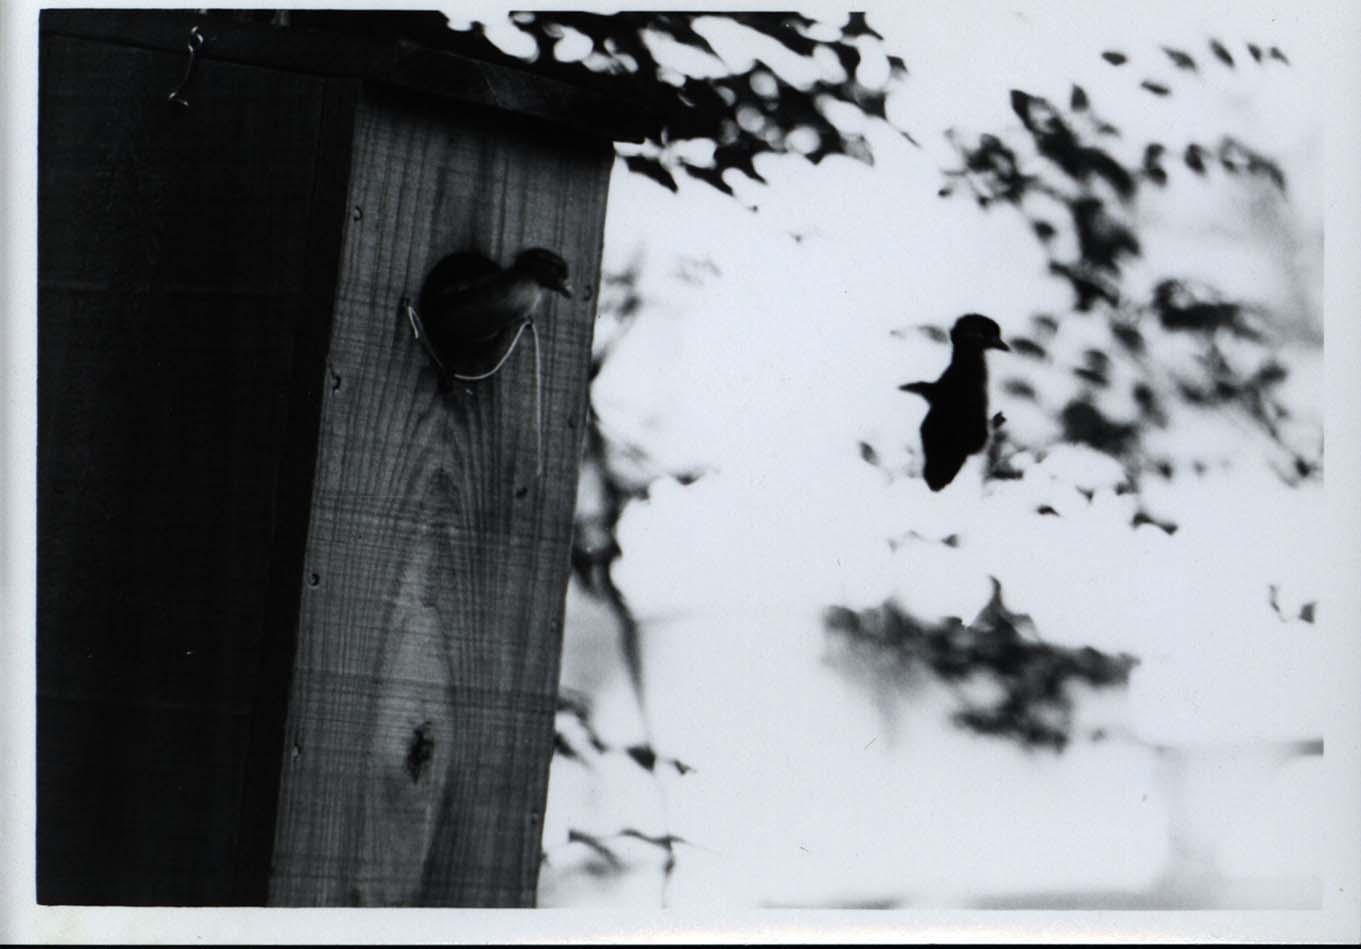 Photograph of Wood Duck ducklings leaving the duck house